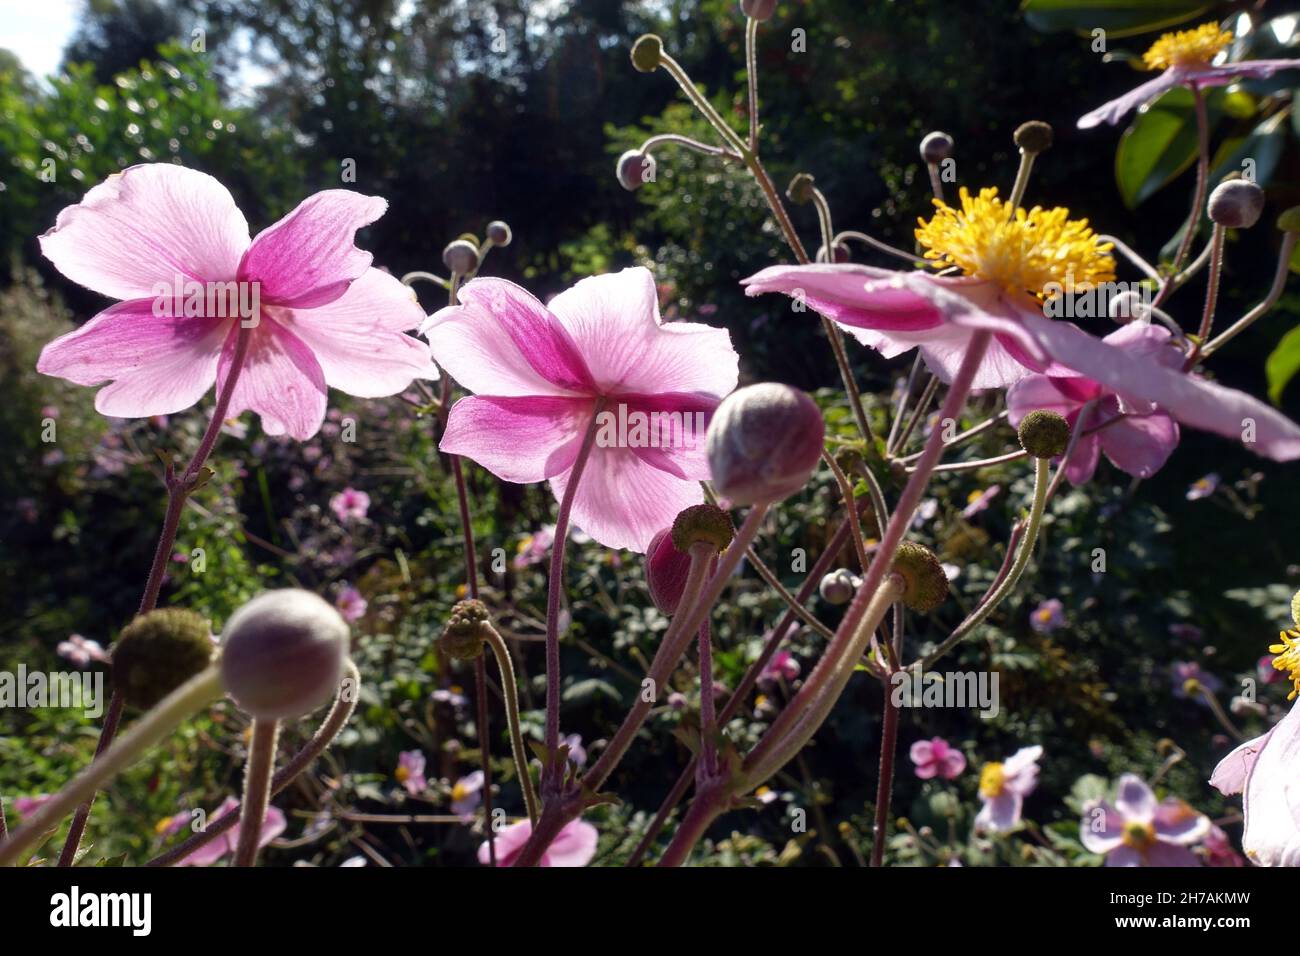 Japanese anemone (Anemone hupehensis), blooming plant in the garden, view from below Stock Photo